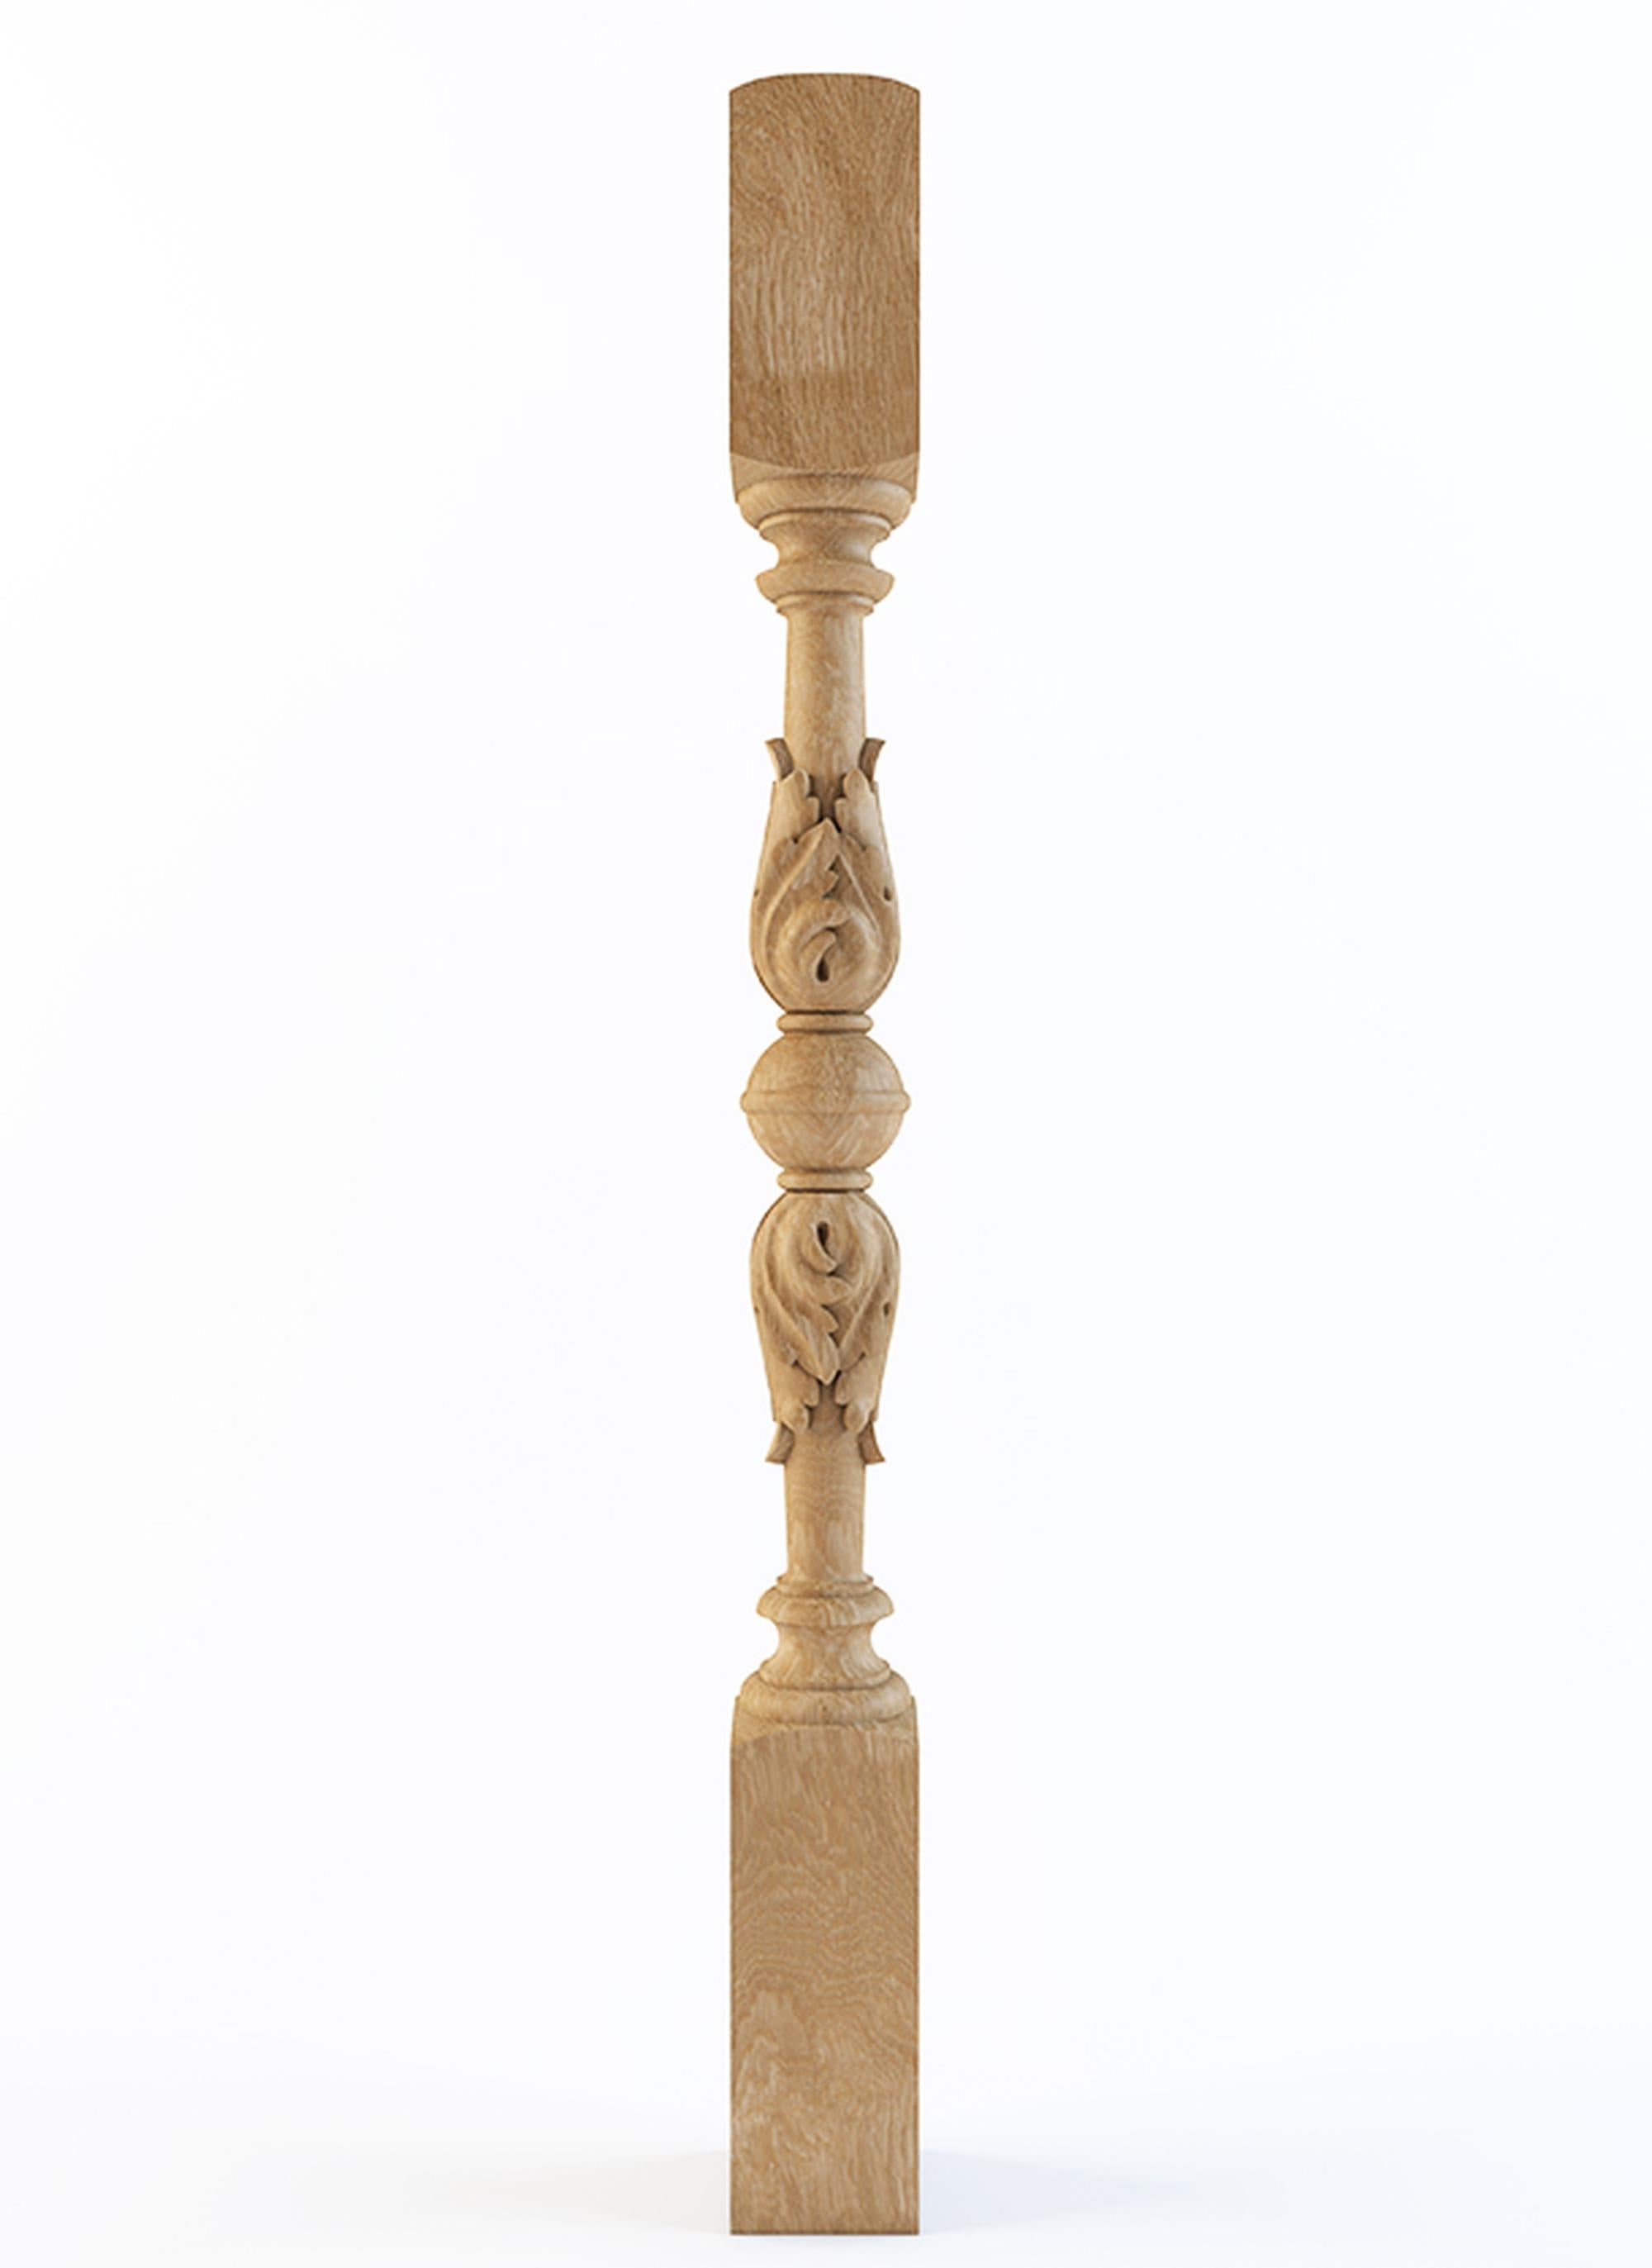 Contemporary Architectural Wood Newel Post with acanthus leaves and ball For Sale